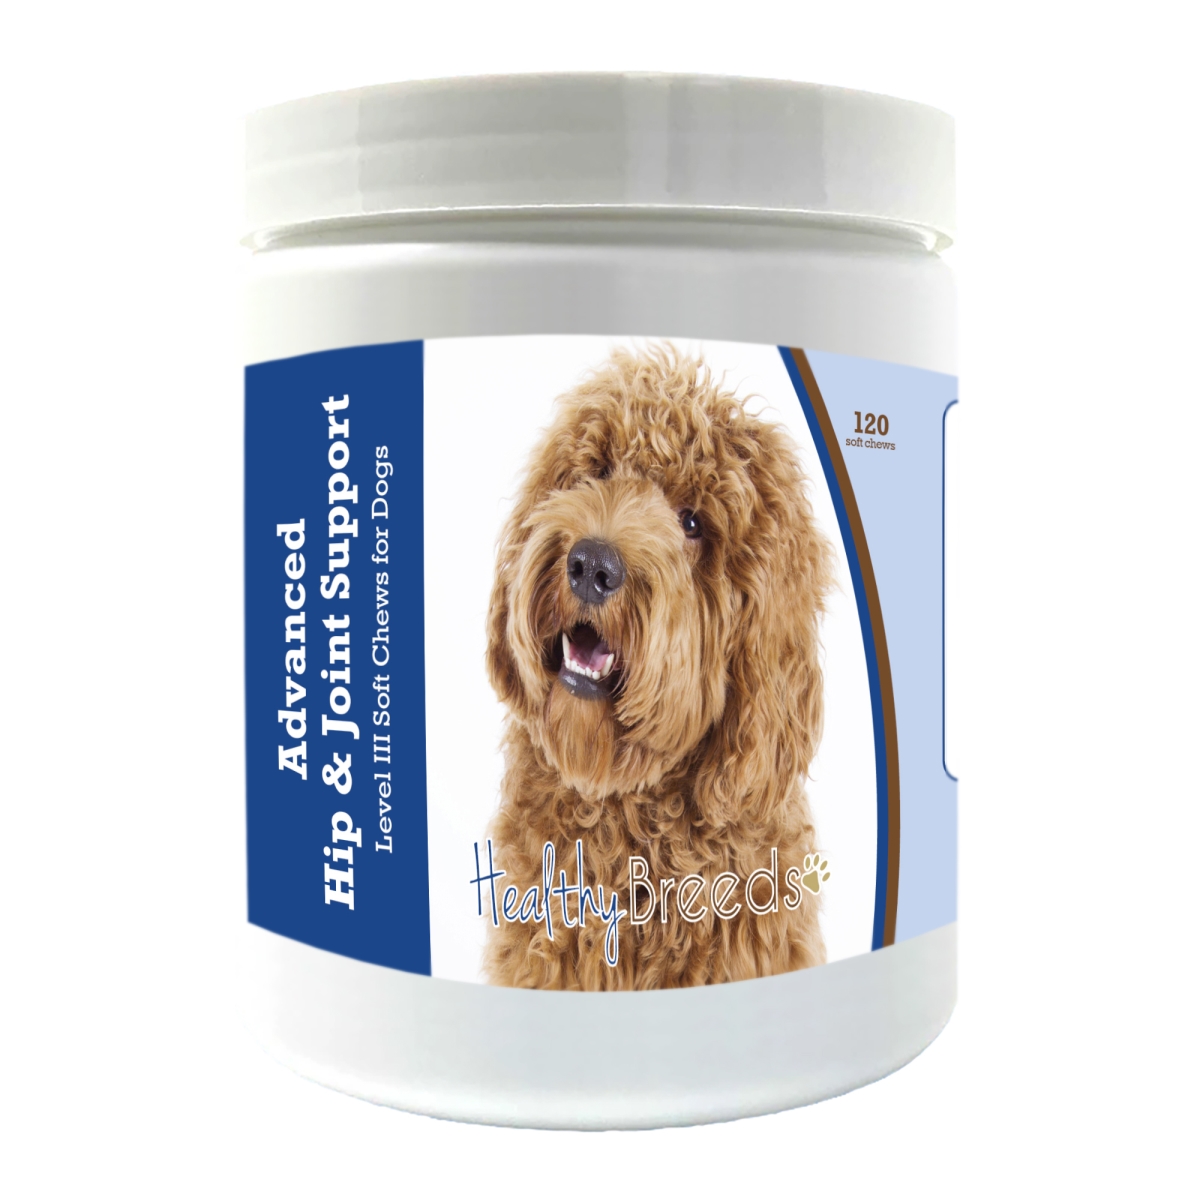 Picture of Healthy Breeds 192959898613 Labradoodle Advanced Hip & Joint Support Level III Soft Chews for Dogs